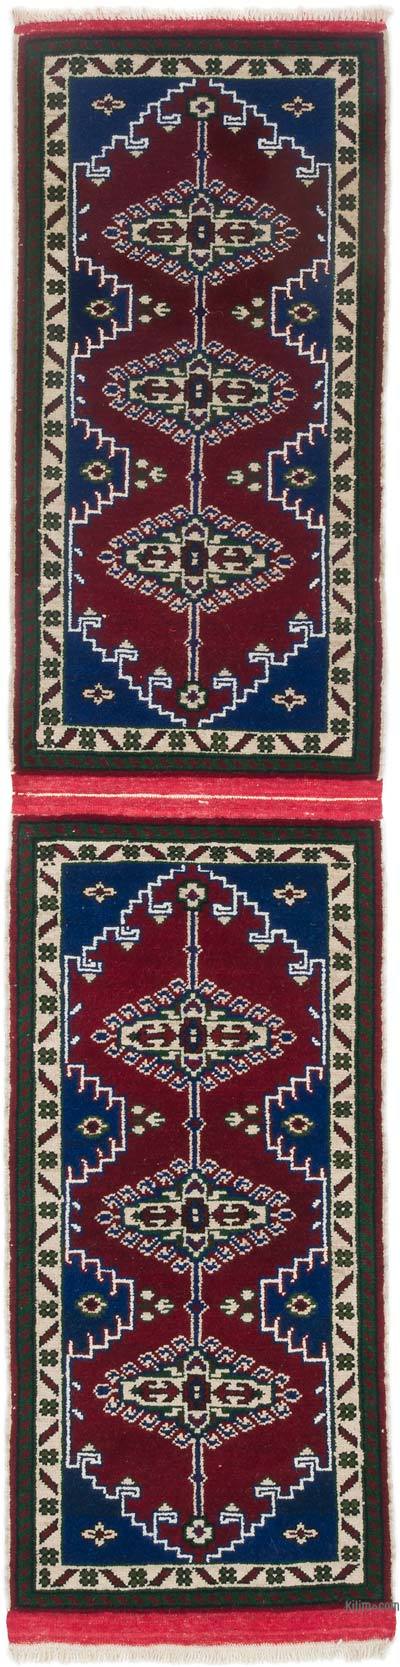 Vintage Turkish Hand-Knotted Runner - 1' 10" x 7' 7" (22 in. x 91 in.)